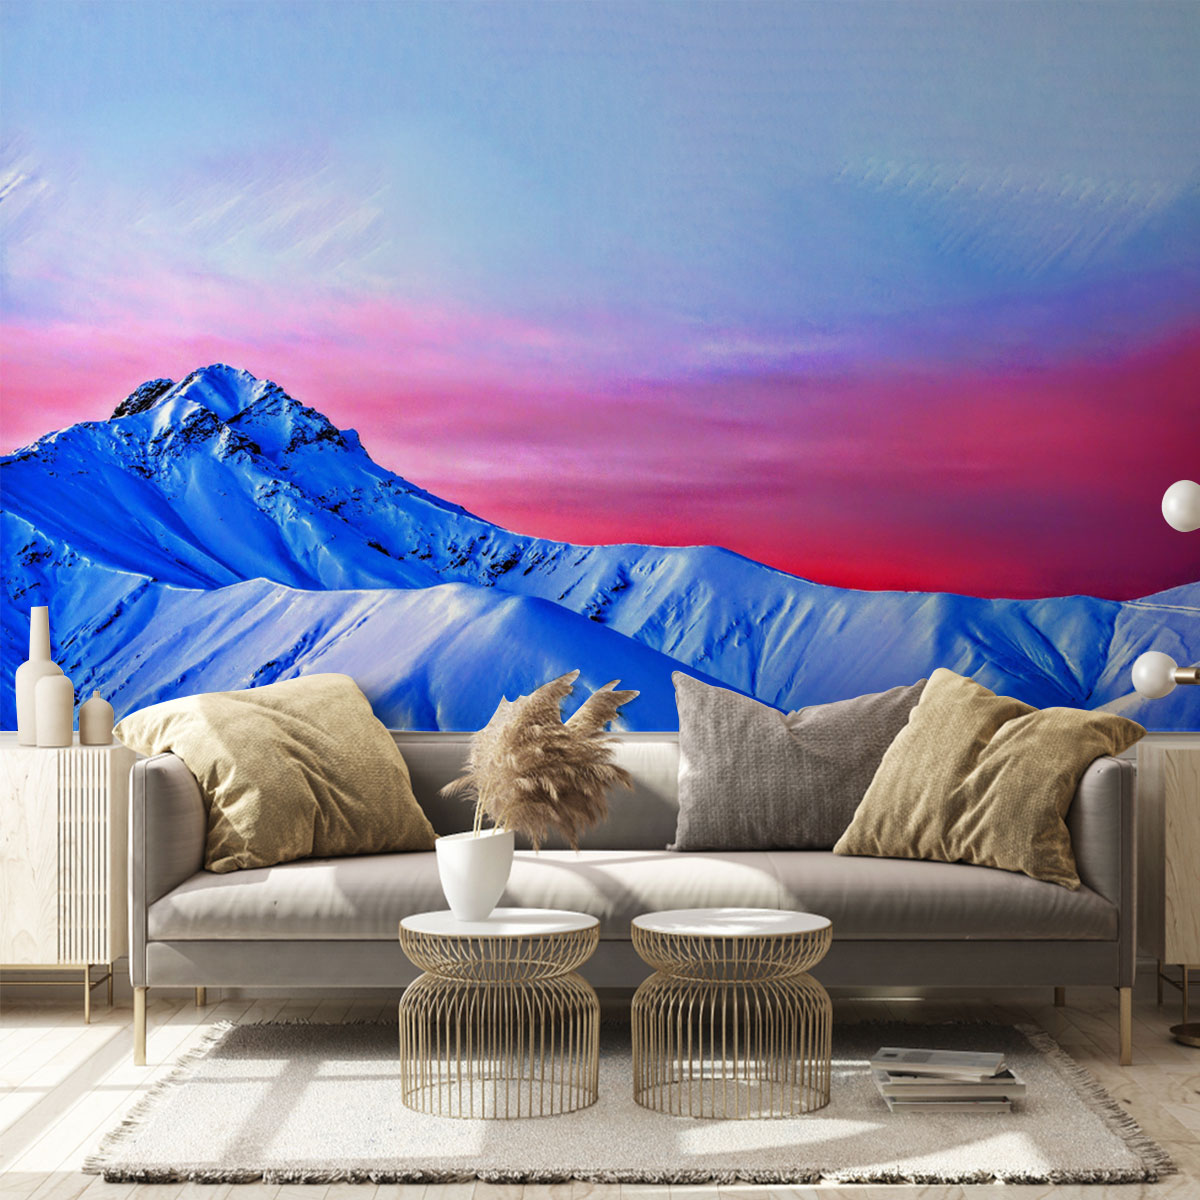 Colorful Mountain Wall Mural